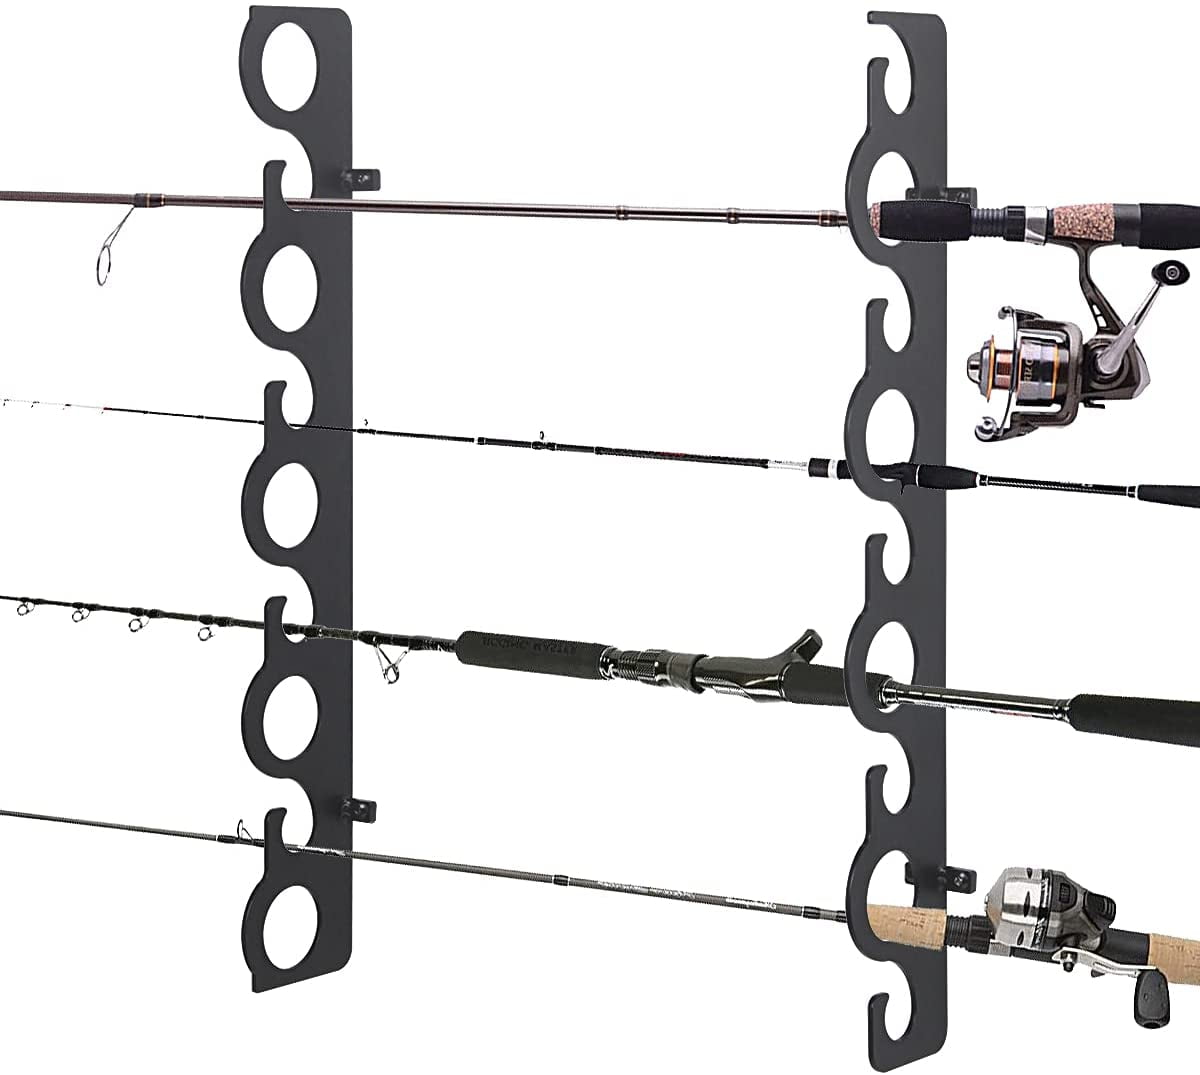 Fishing Pole Holder Wall or Ceiling Mount Rack, Fishing Rod Storage Rack,  Holds 9 Rods for Home, Store, Cabin, Garage, Basement 